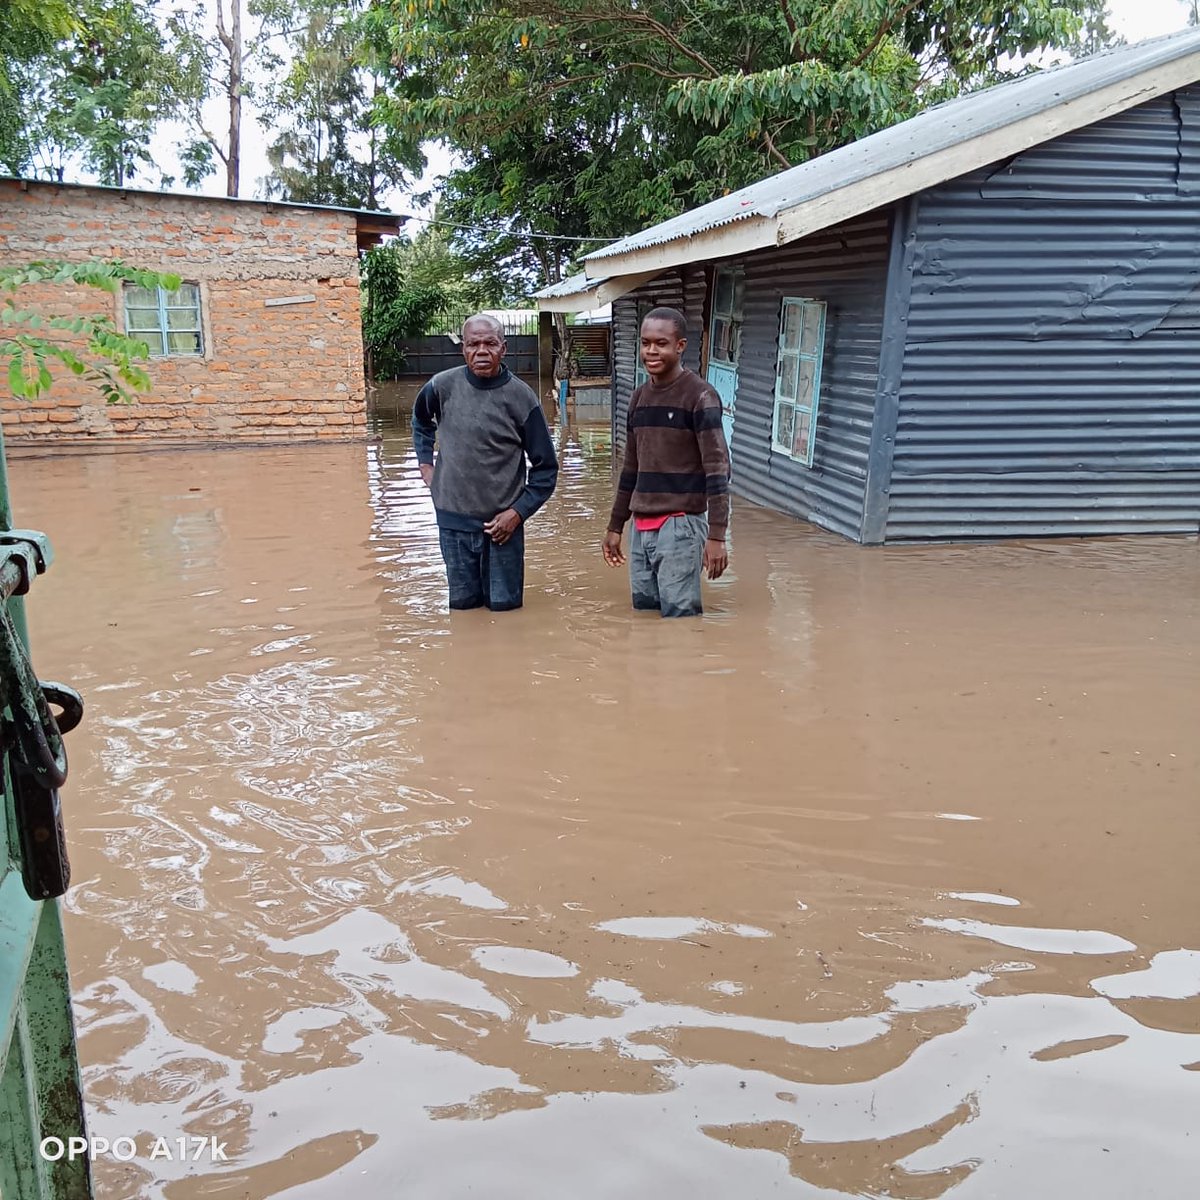 Floods have been wreaking havoc on communities across the country since last year, displacing families, destroying homes and disrupting livelihoods. One wonders where is the 10 billion set aside on this issue? #RavagingFlood #StaySafeKE